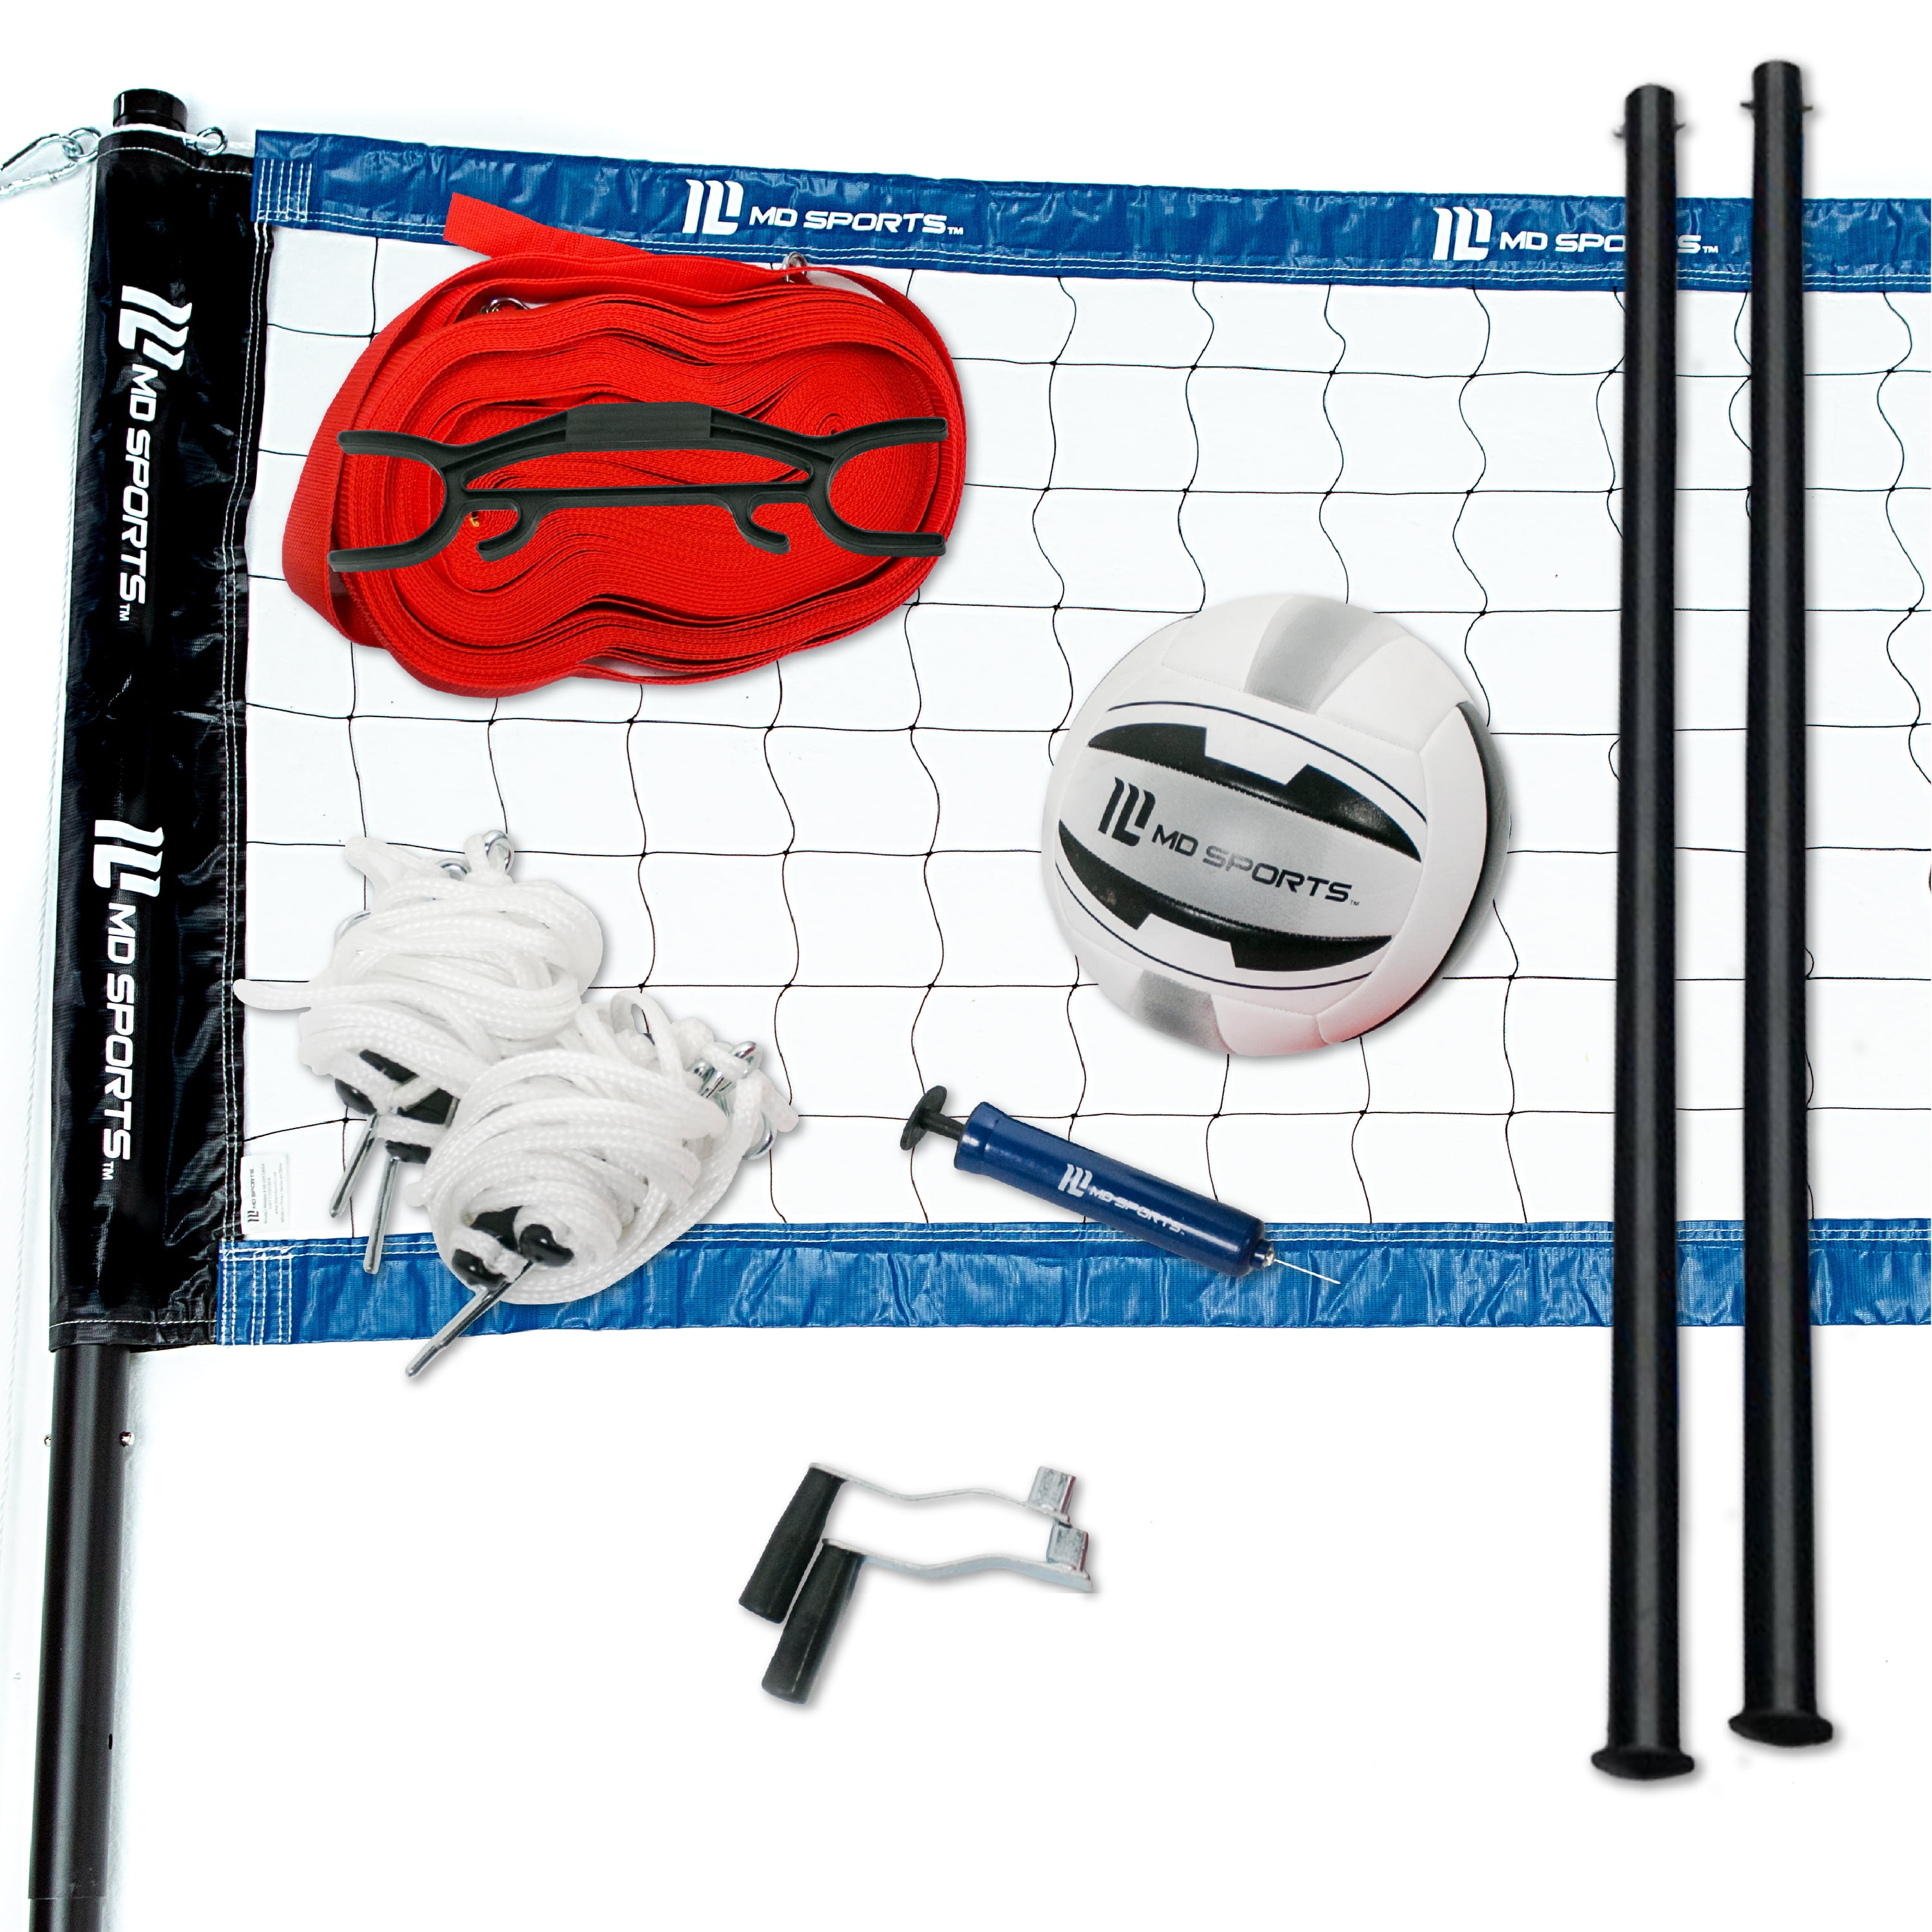 Dunlop Competitive Volleyball Set with Carry Bag Quick Setup Adjustable New 